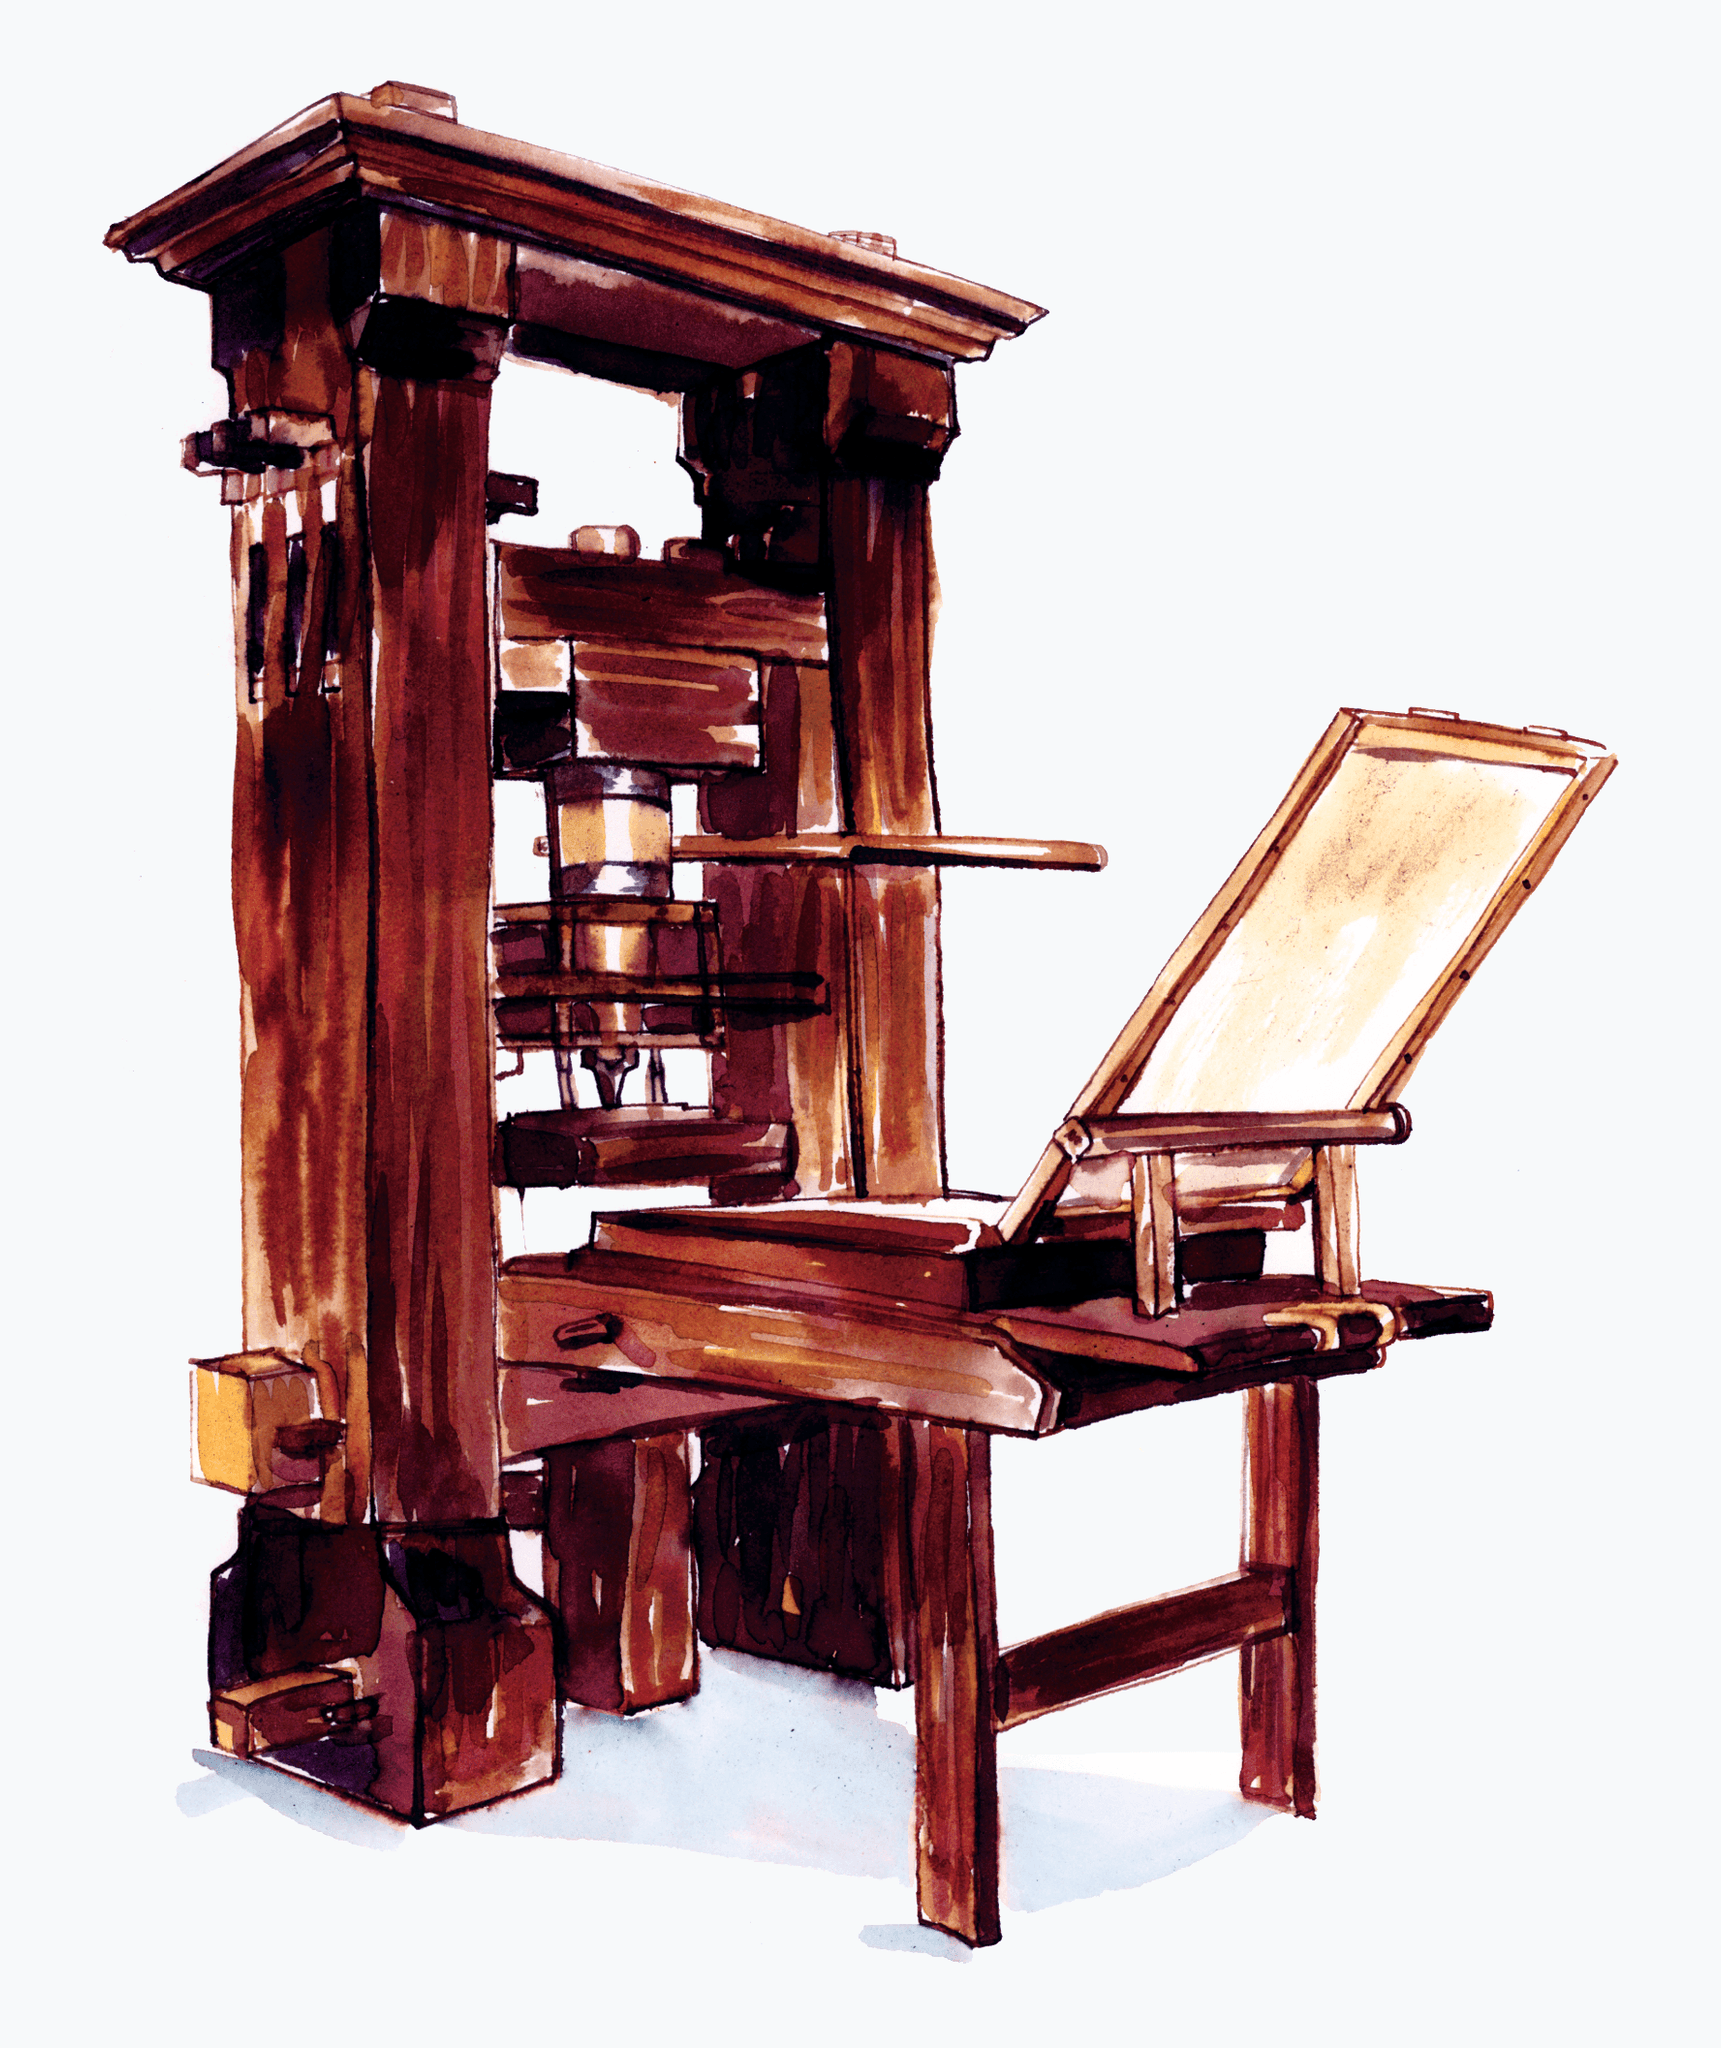 The History of Bookbinding